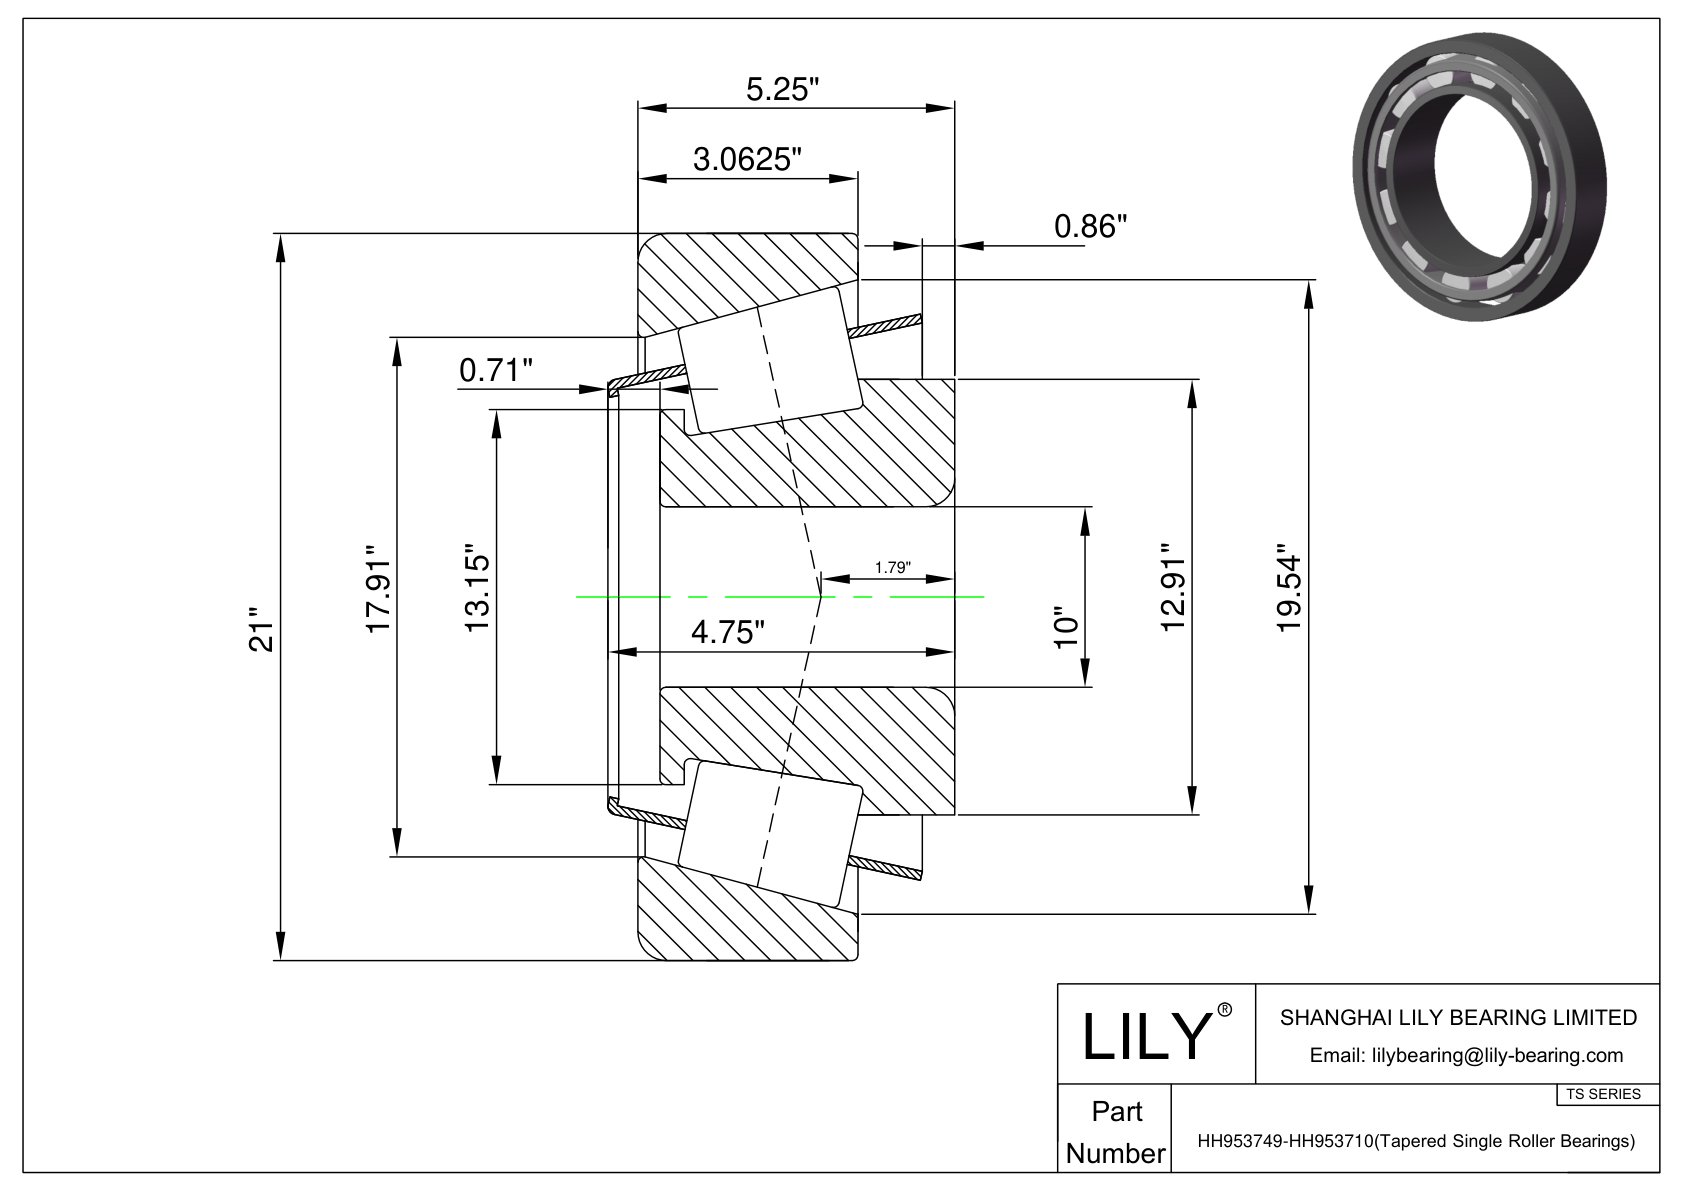 HH953749-HH953710 TS (Tapered Single Roller Bearings) (Imperial) cad drawing